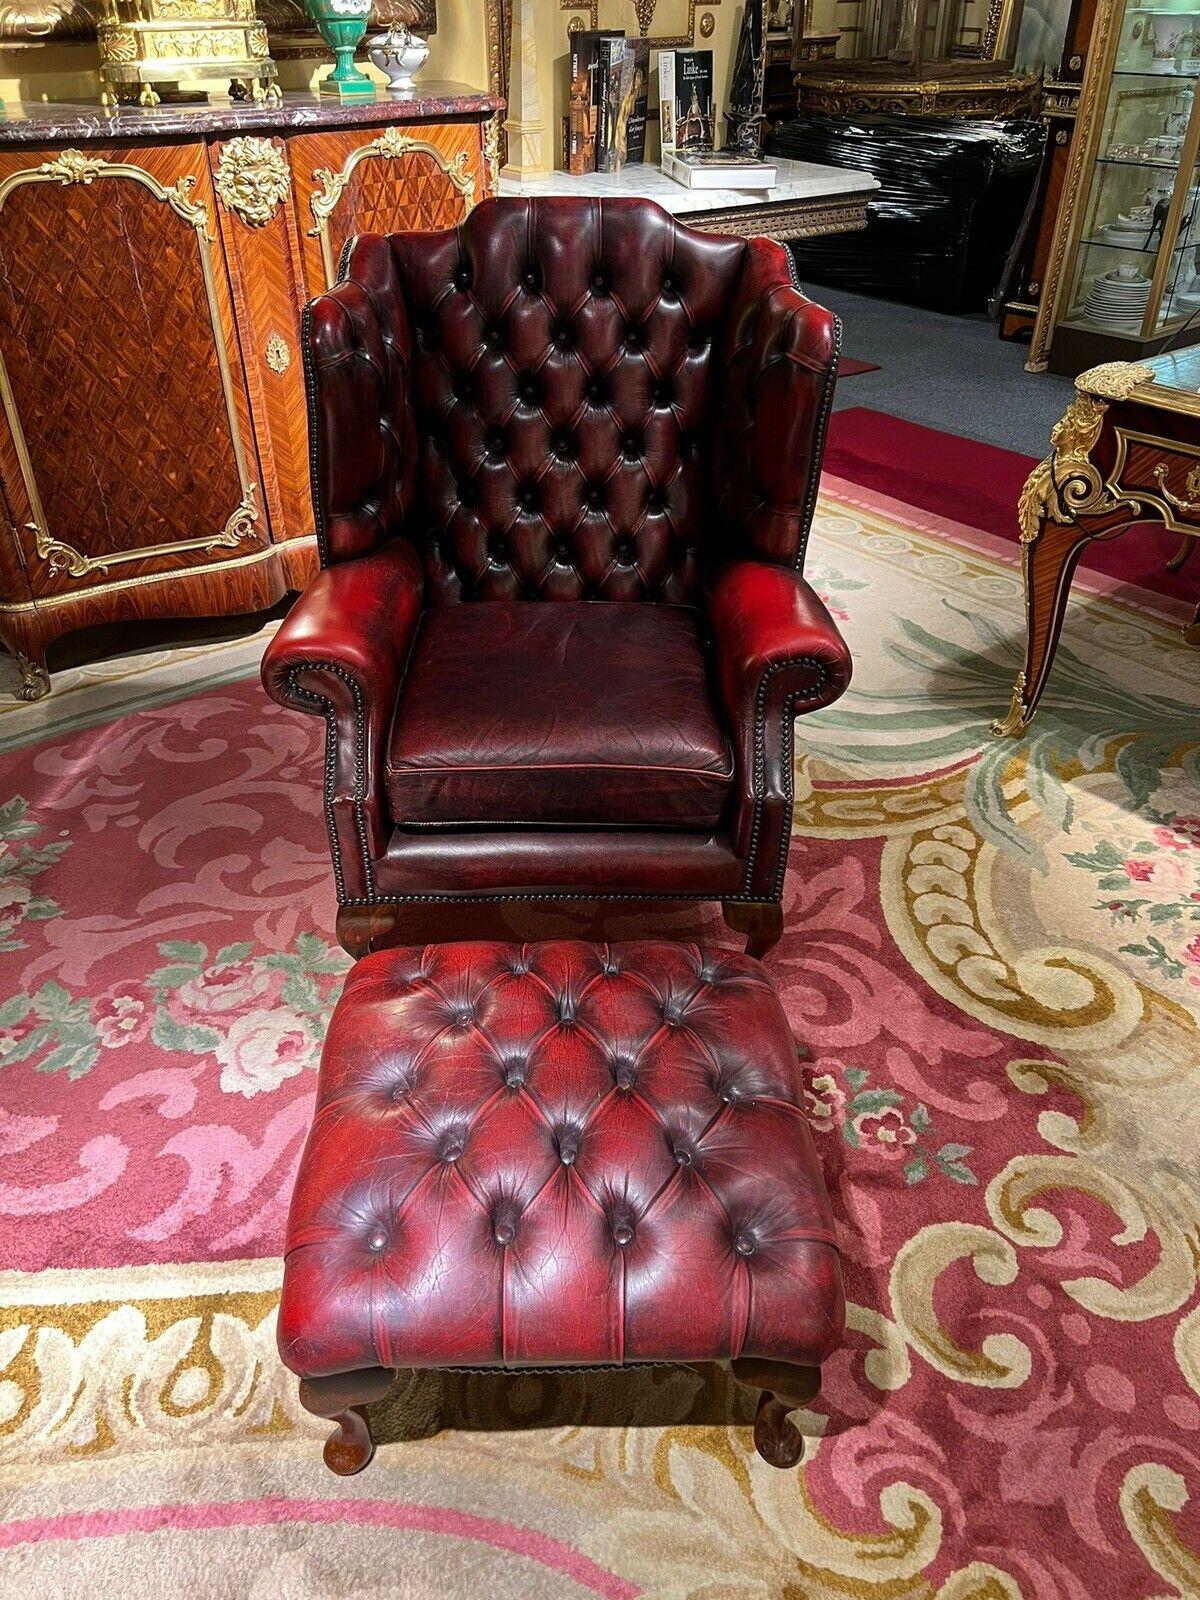 We are delighted to offer for sale this lovely vintage Chesterfield wingback armchair and footstool in Oxblood leather A lovely pair, full of vintage charm and character, we have lightly restored them to include a deep cleaned hand condition wax and